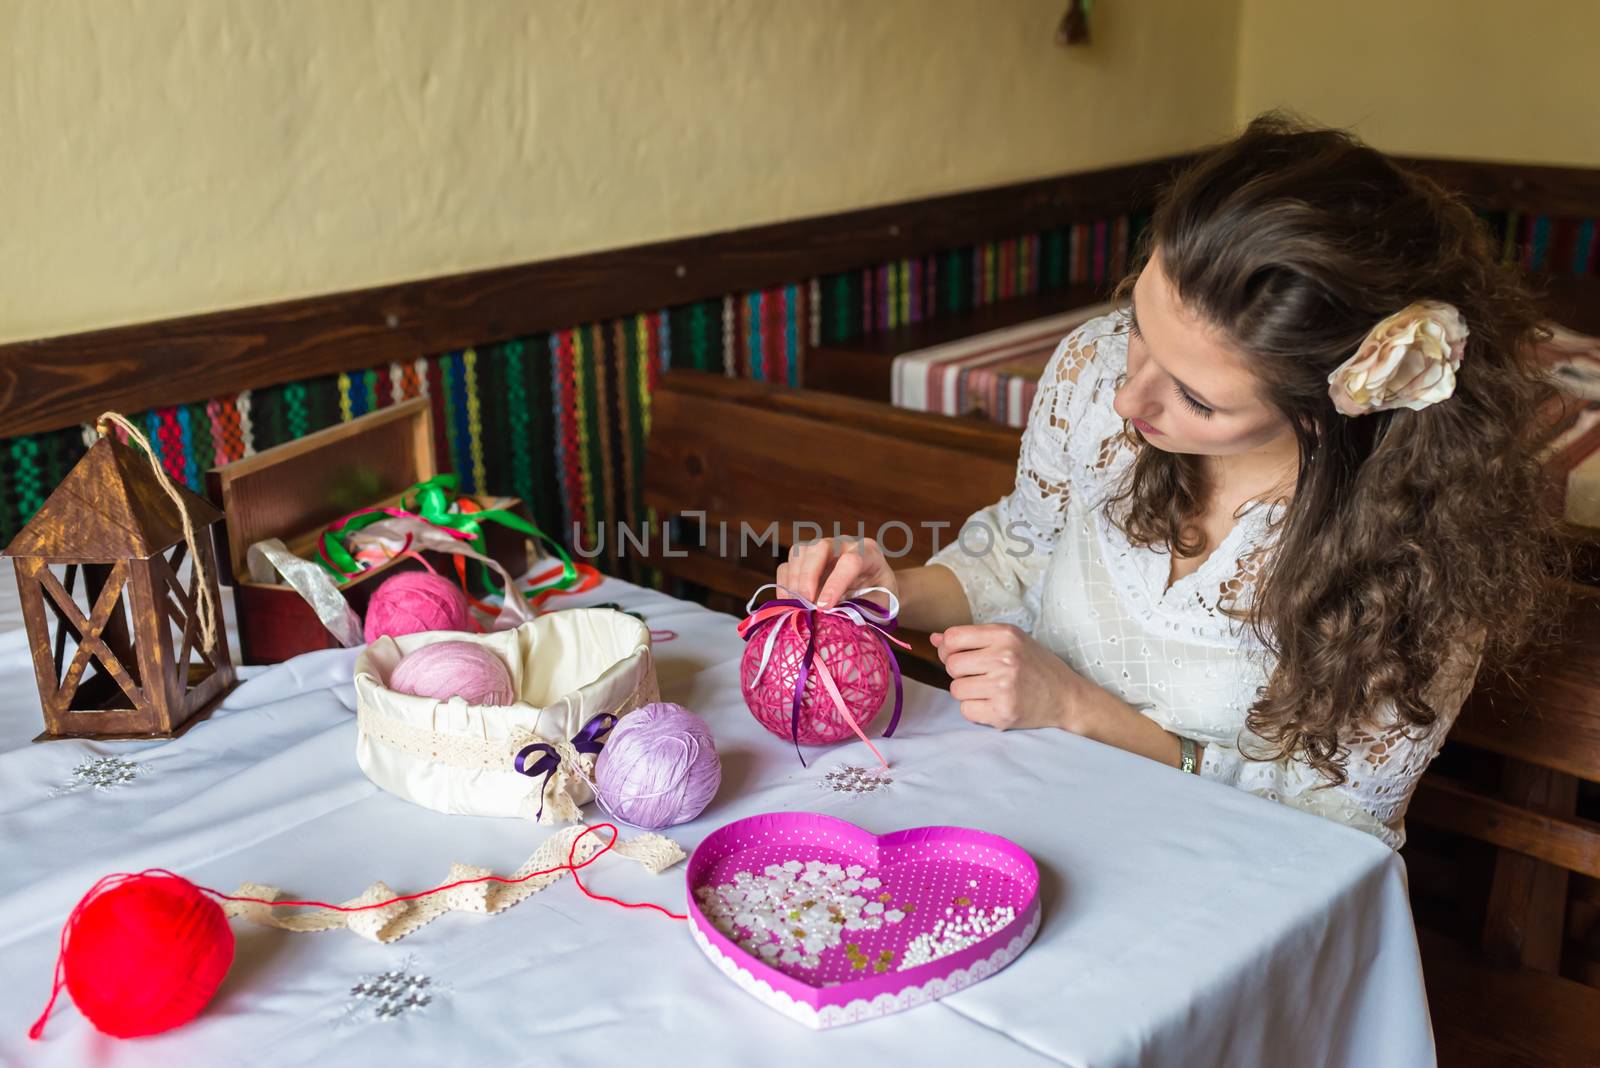 Girl makes balloon decoration with colored threads and ribbons